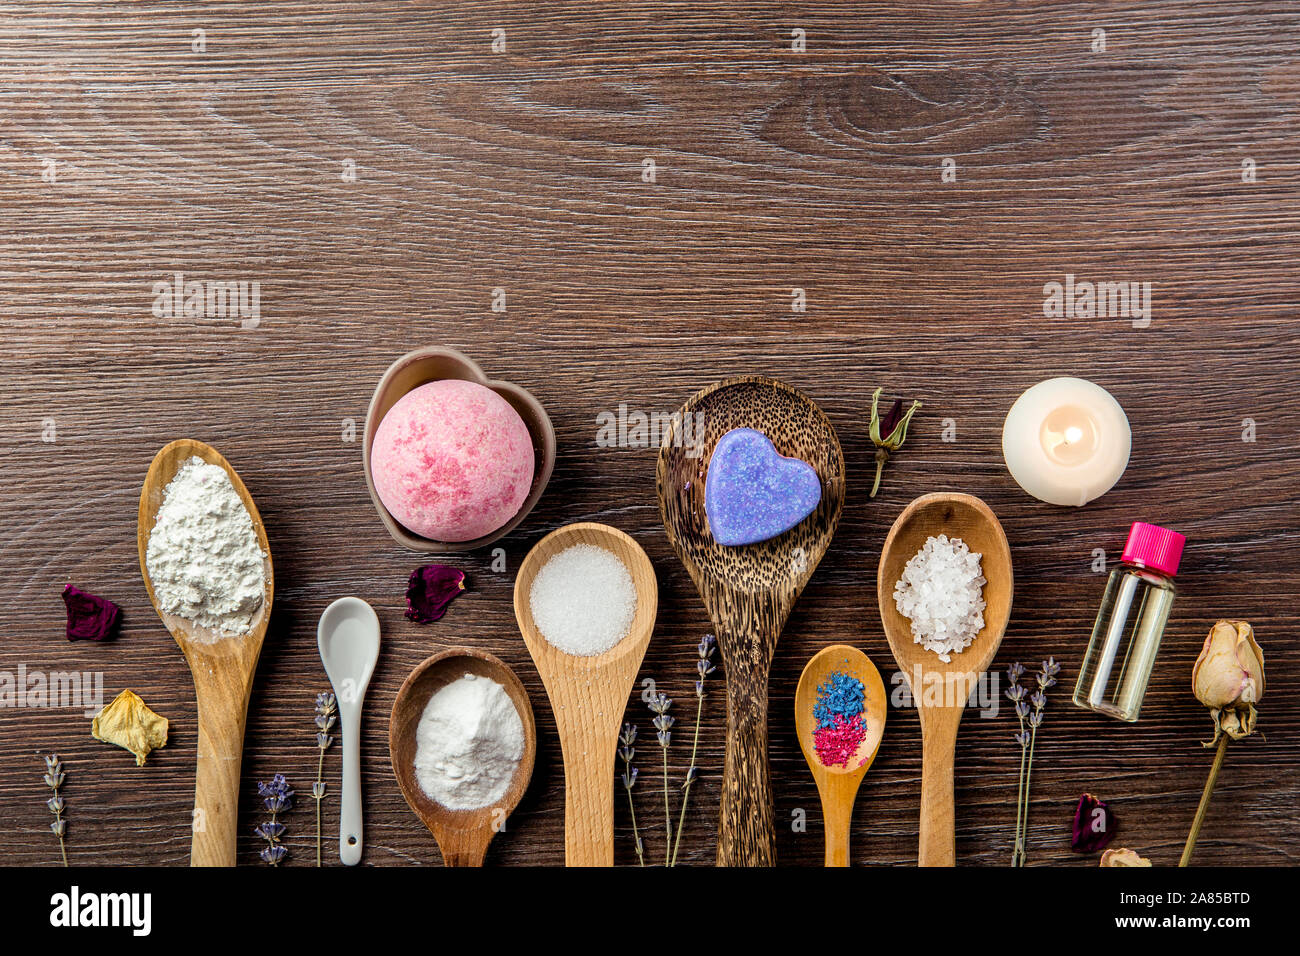 Making bath bombs at home concept. All the ingredients on table on wood spoons. Stock Photo